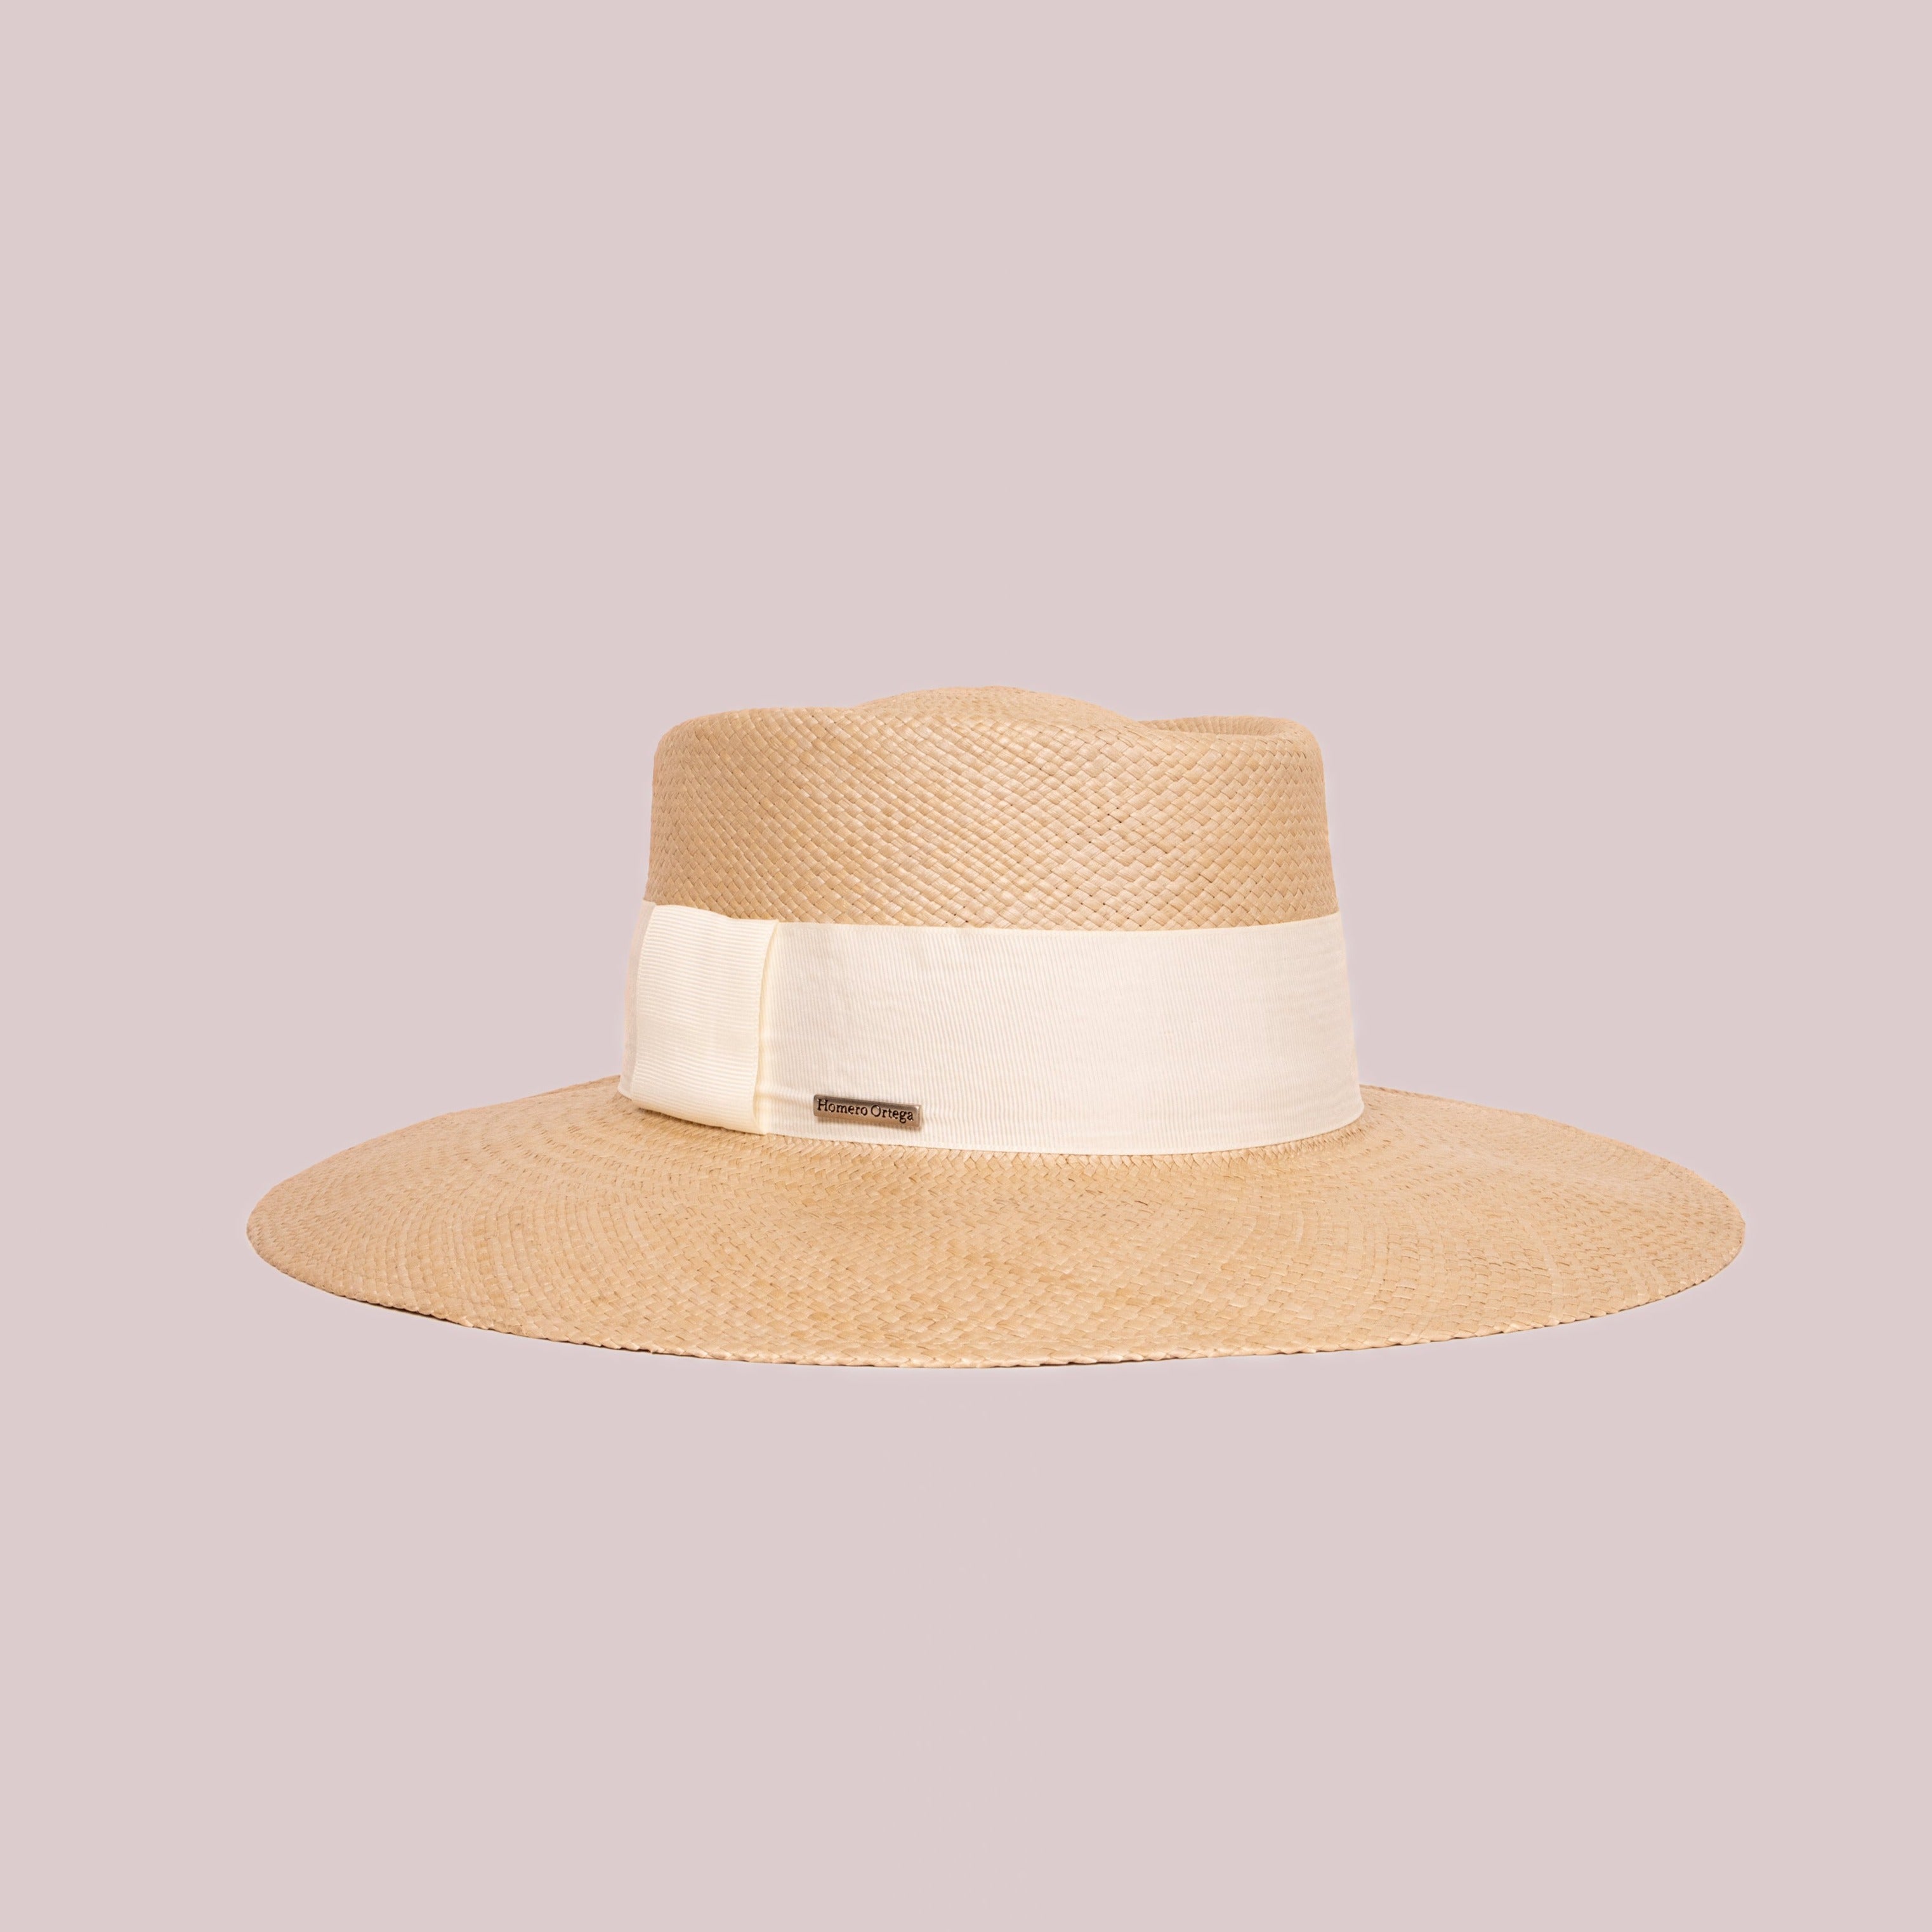 stylish summer hats for women in melbourne